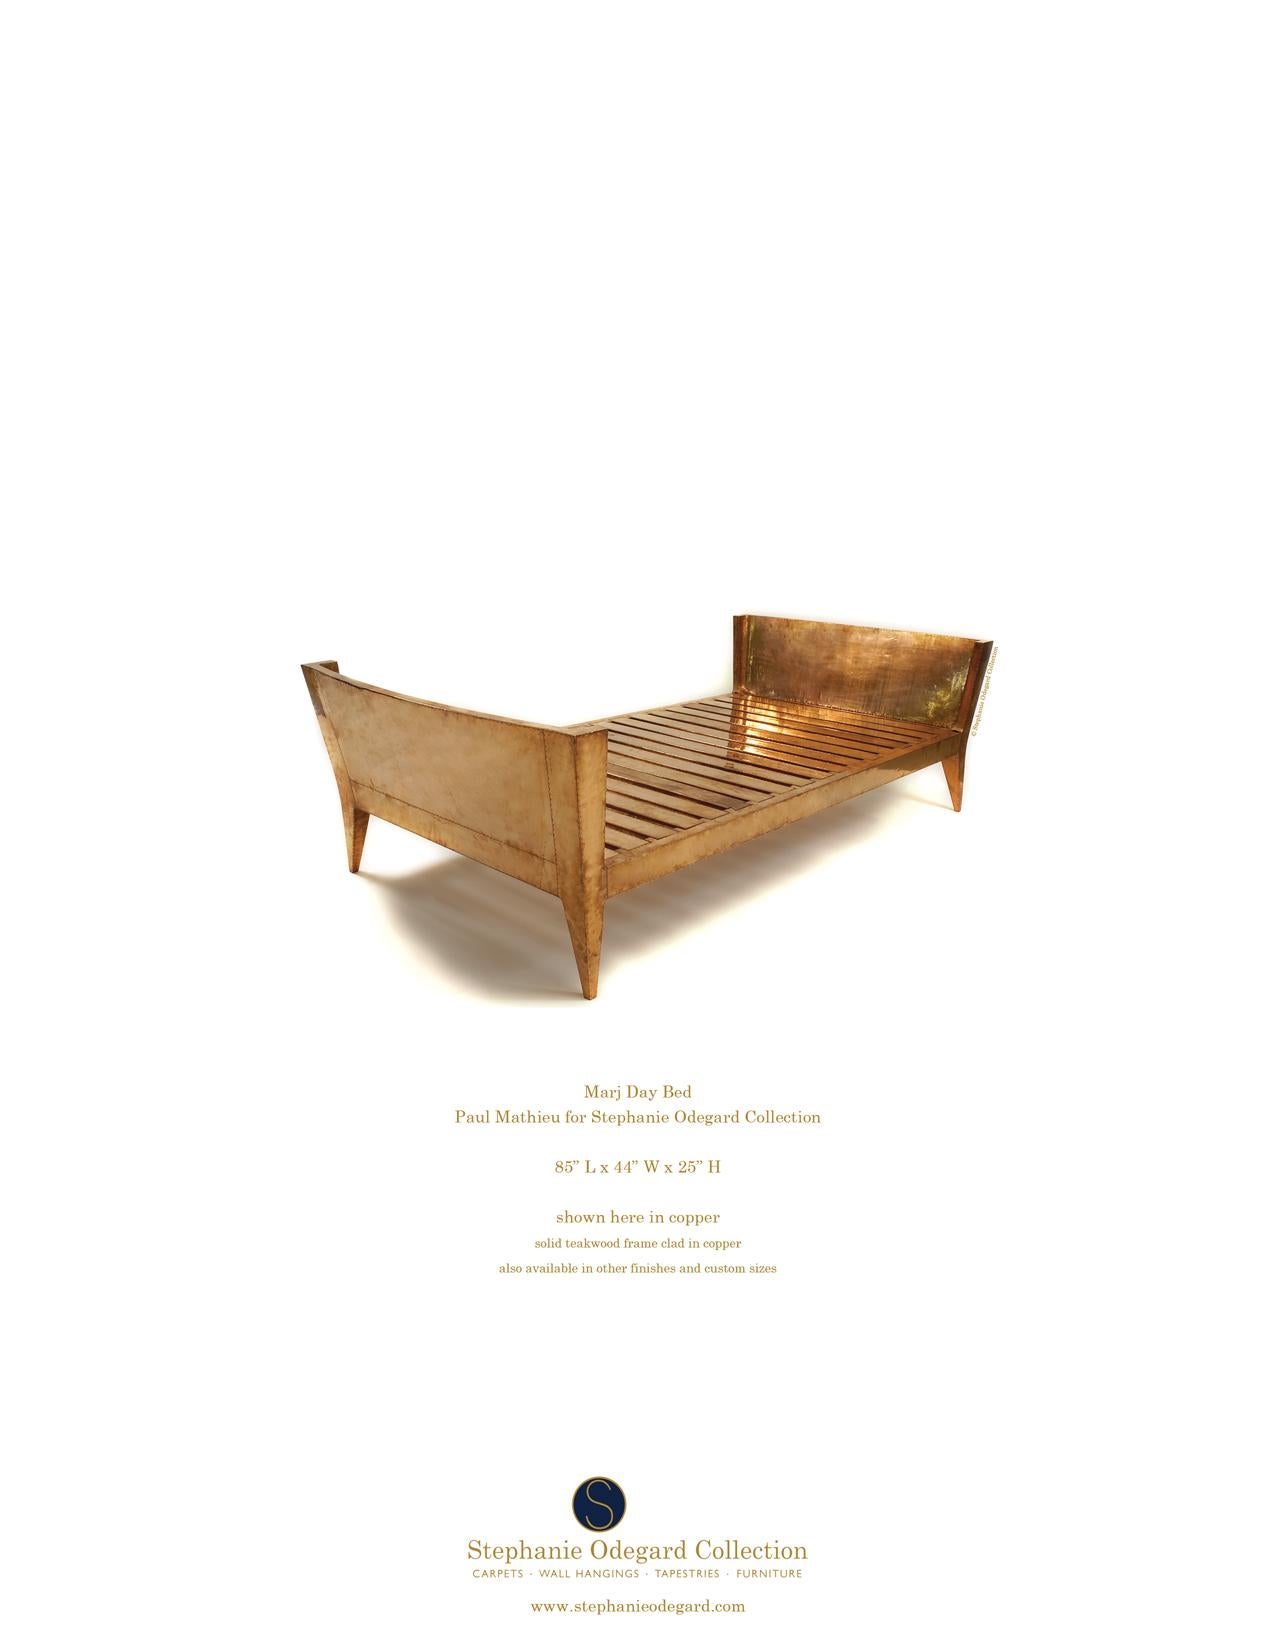 Hand-Carved Daybed Louis XVI Style in Copper Clad on Teak Wood, Daybed by Paul Mathieu For Sale